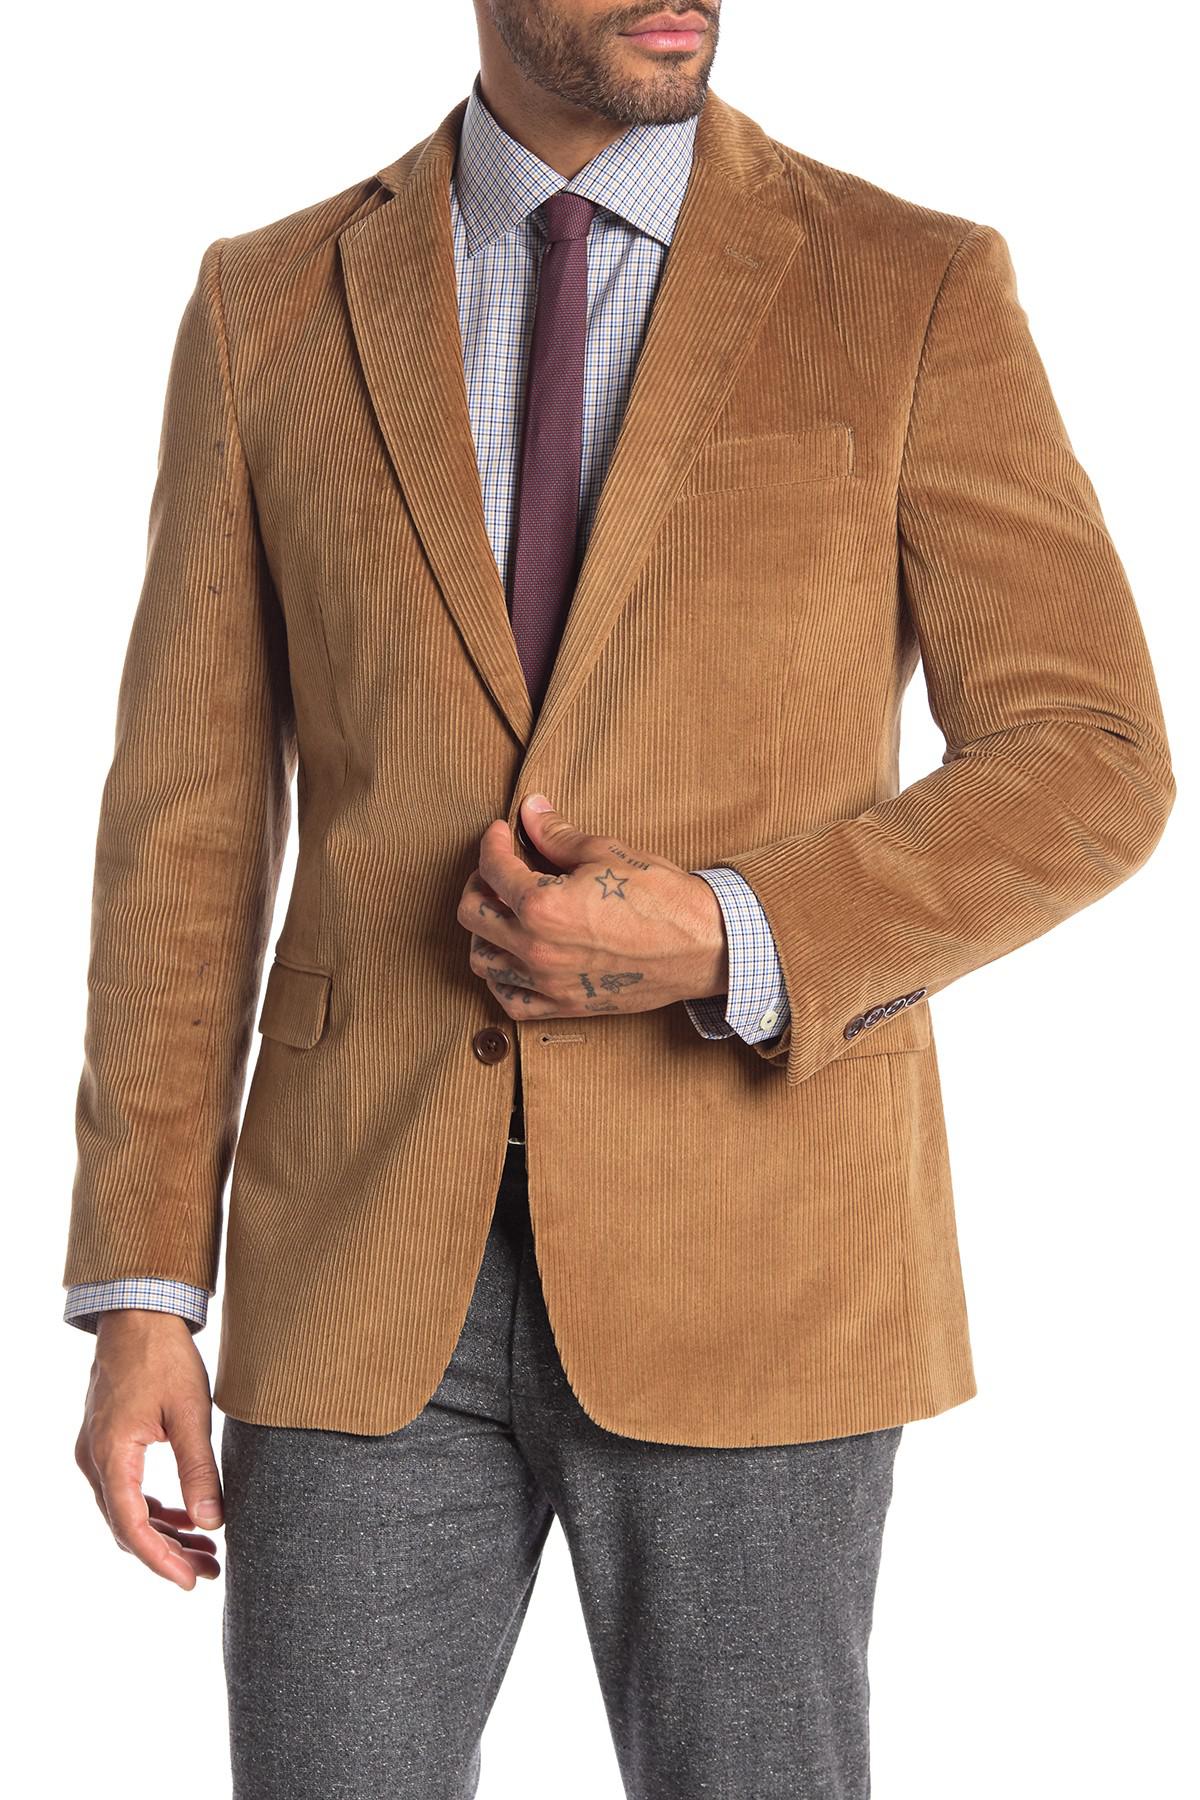 Lyst - Brooks Brothers Classic Fit Two Button Corduroy Sport Jacket in